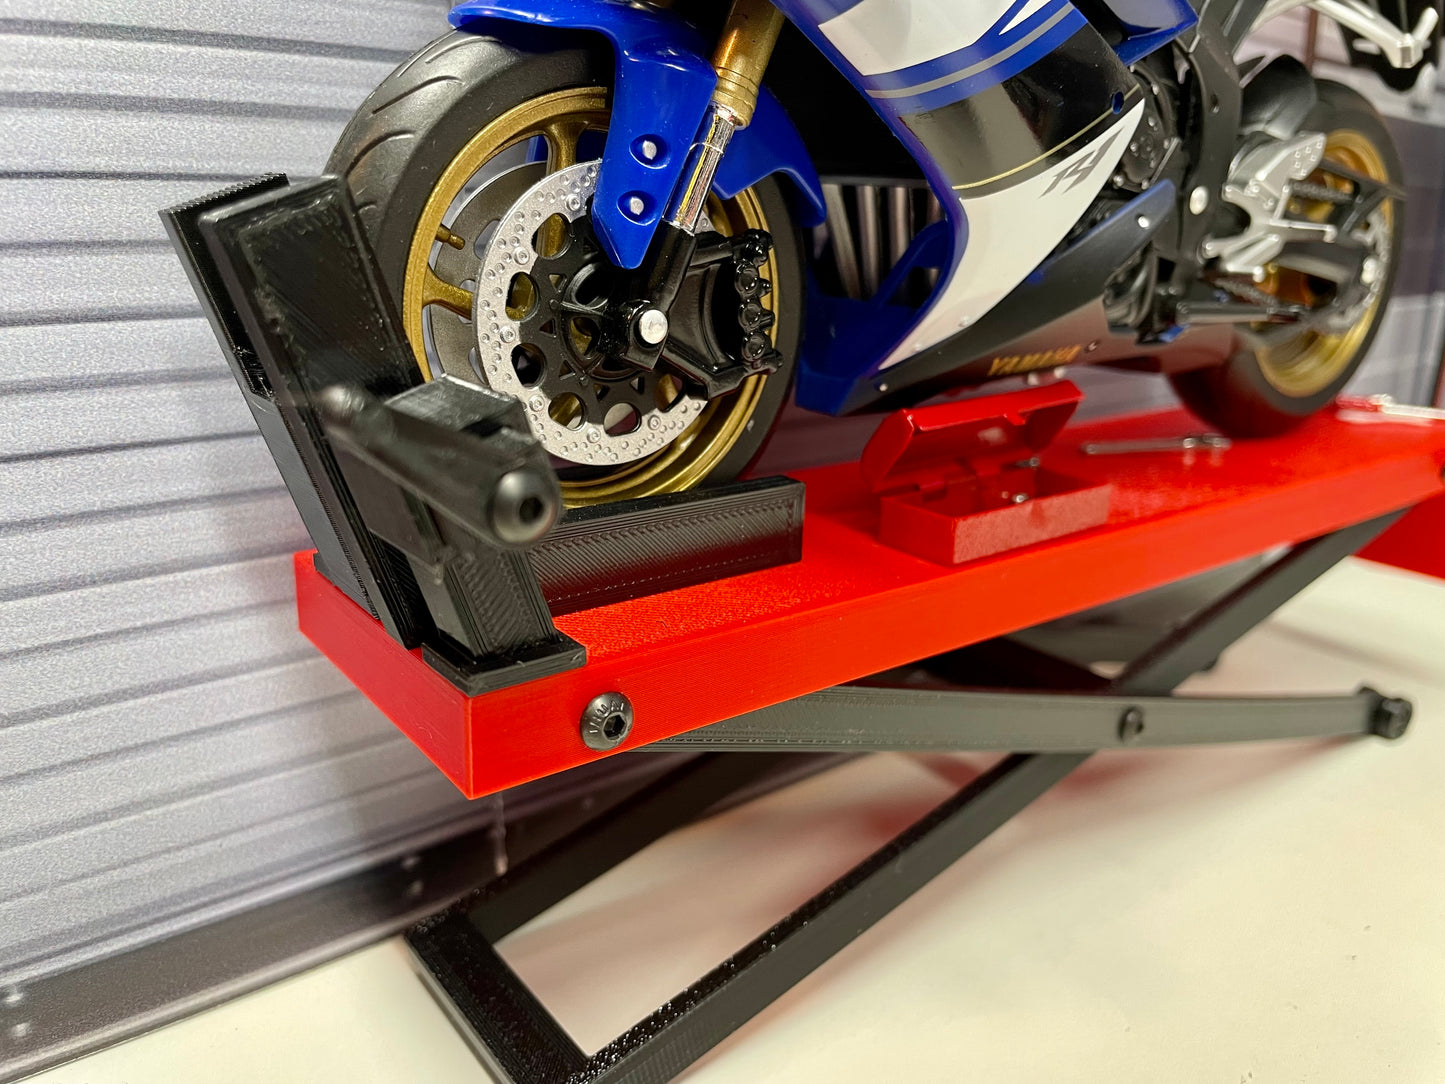 1/10 Scale Motorcycle Work Stand